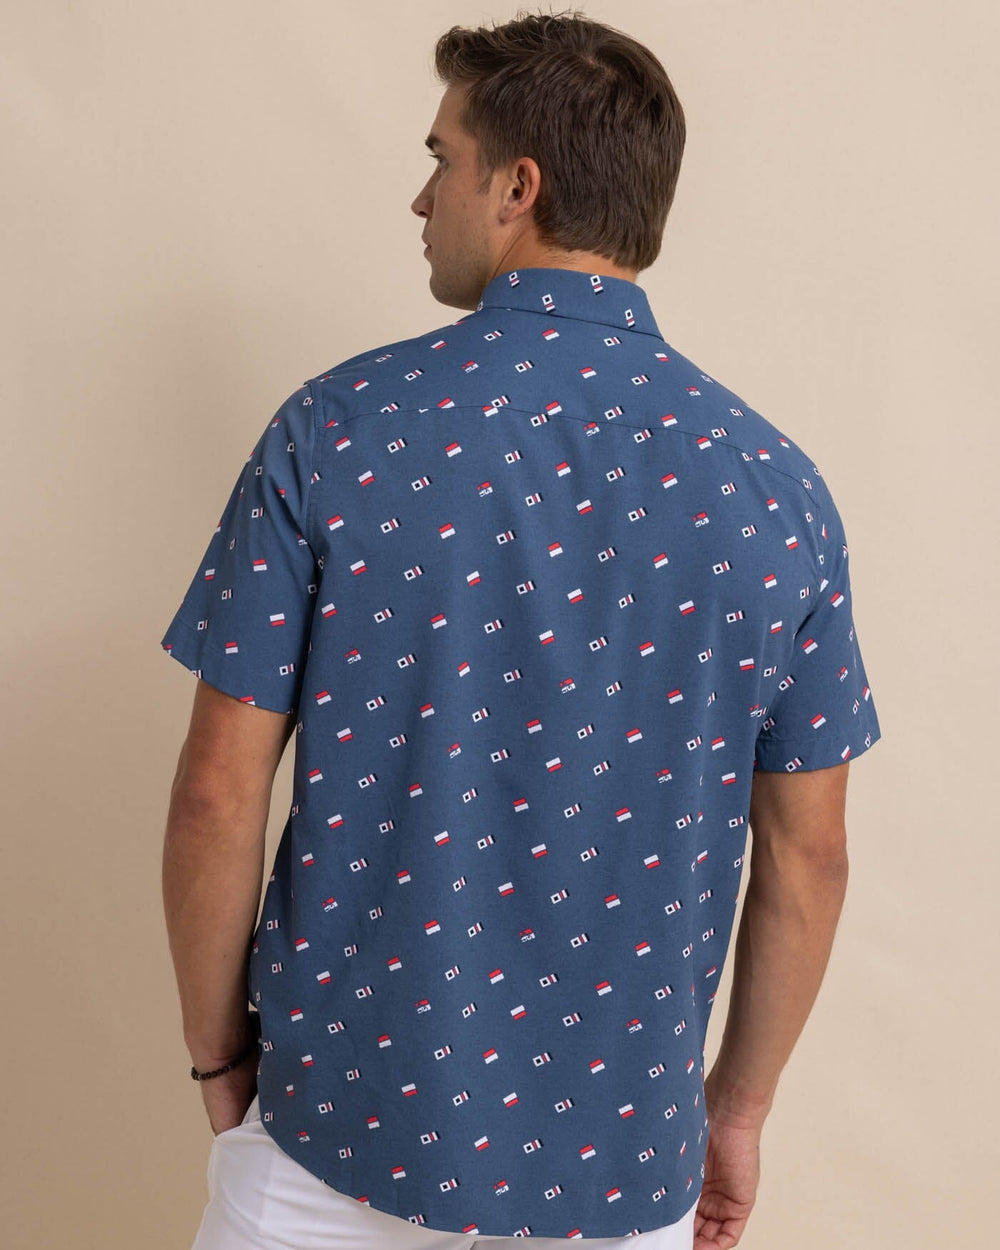 The back view of the Southern Tide Keep It Nautical Intercoastal Heather Short Sleeve Sportshirt by Southern Tide - Heather Aged Denim